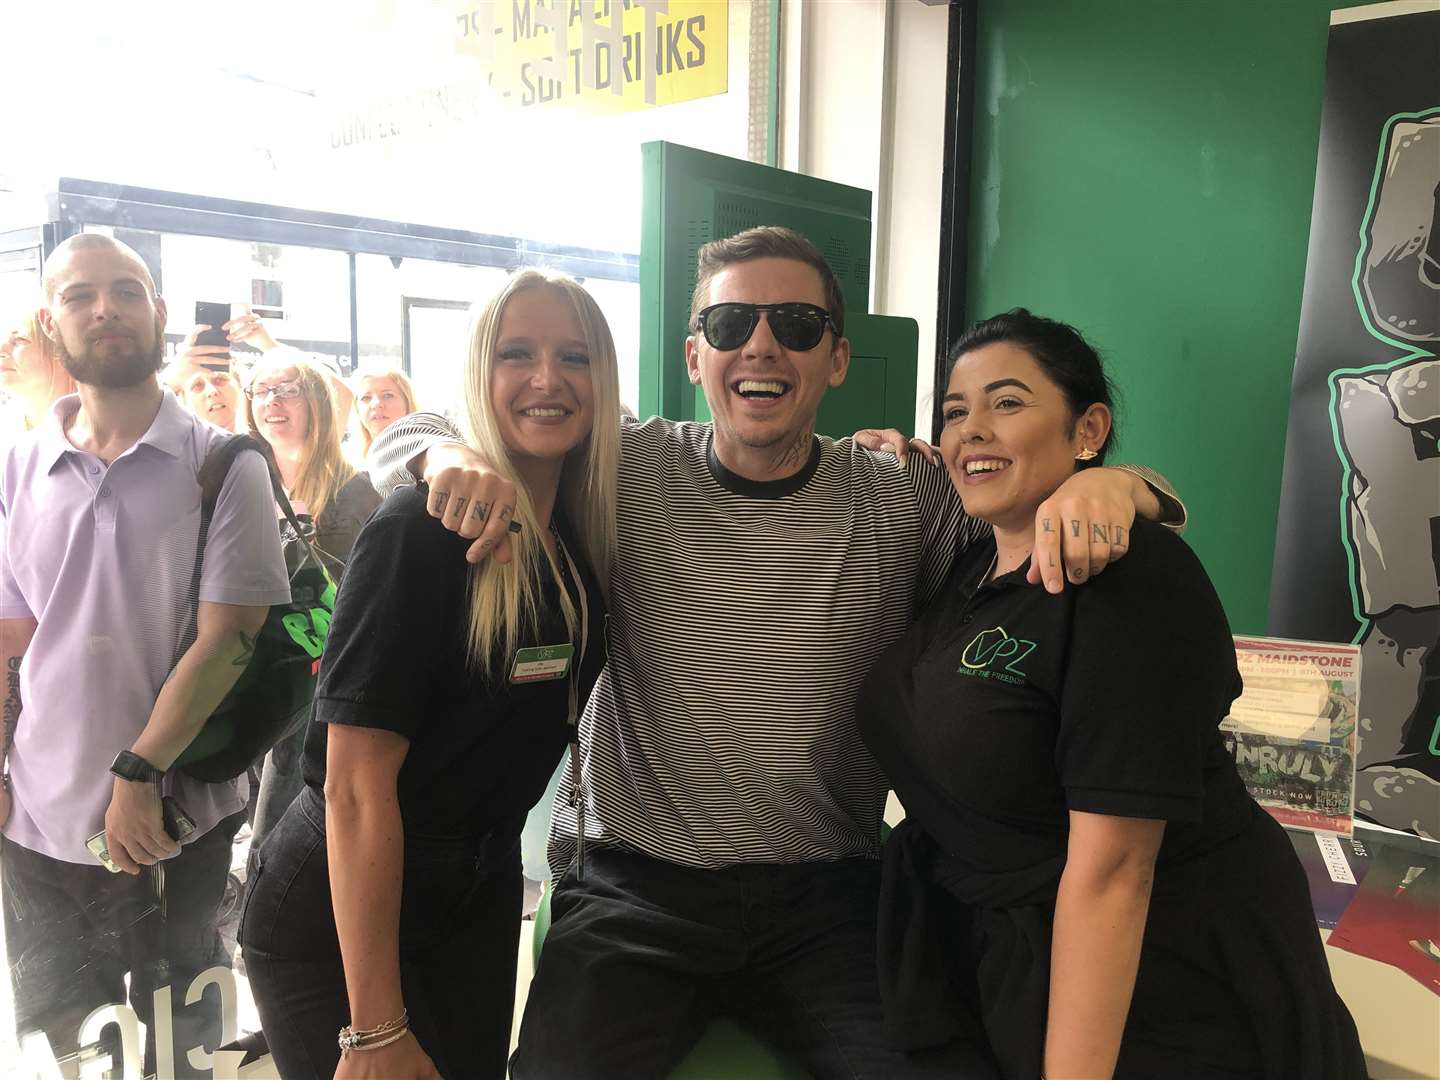 Professor Green was at the VPZ store in Maidstone (14964787)